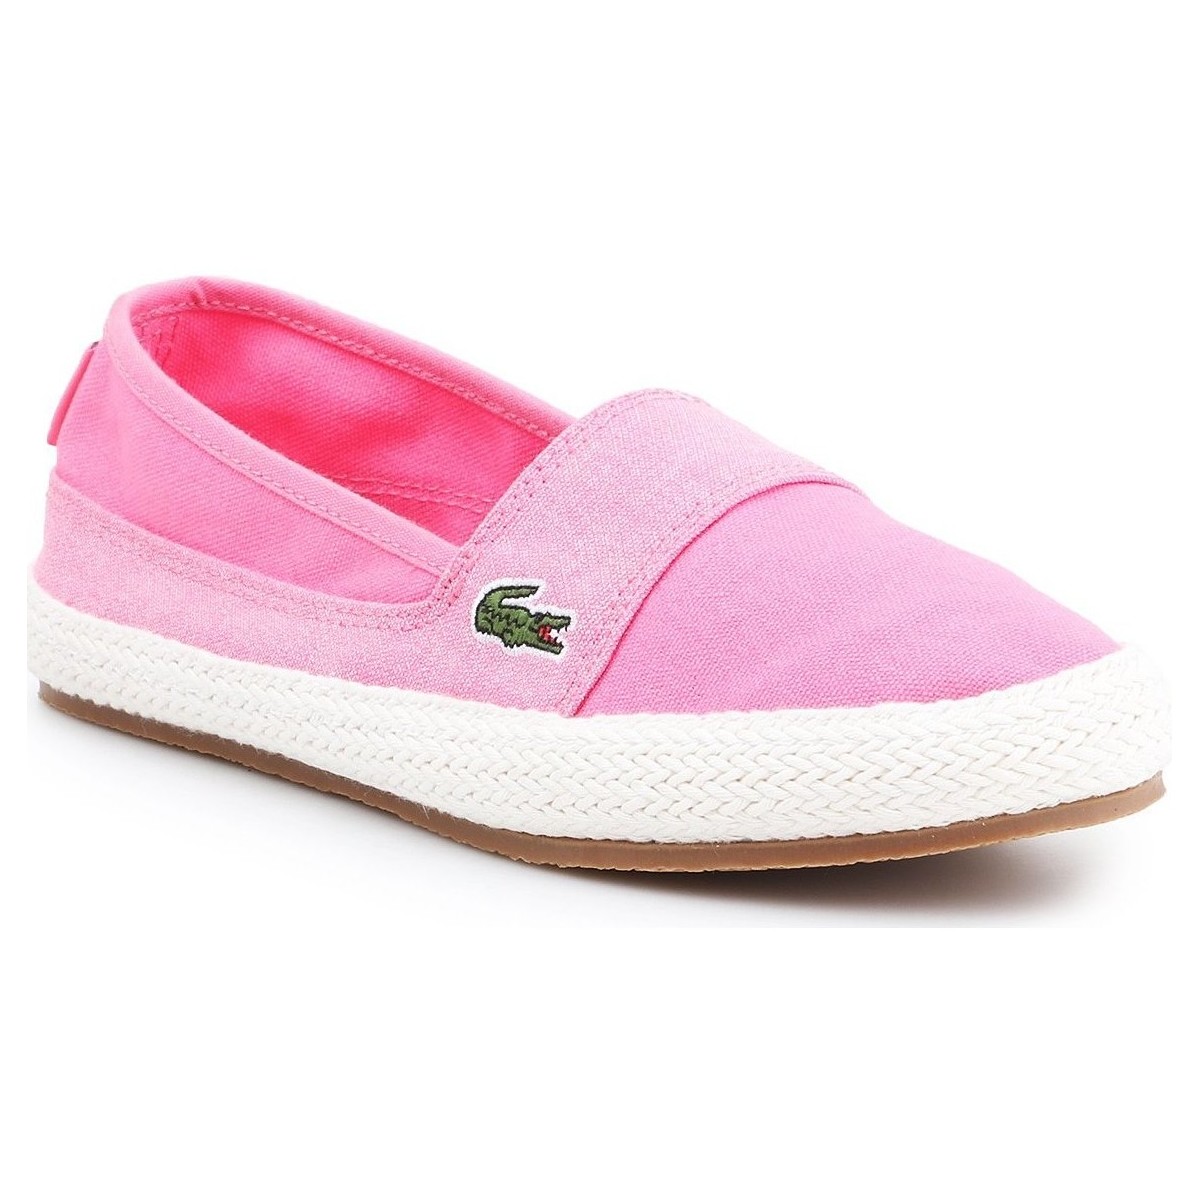 Sapatos Mulher Sapatilhas Lacoste Marice 7-35CAW004213C Rosa